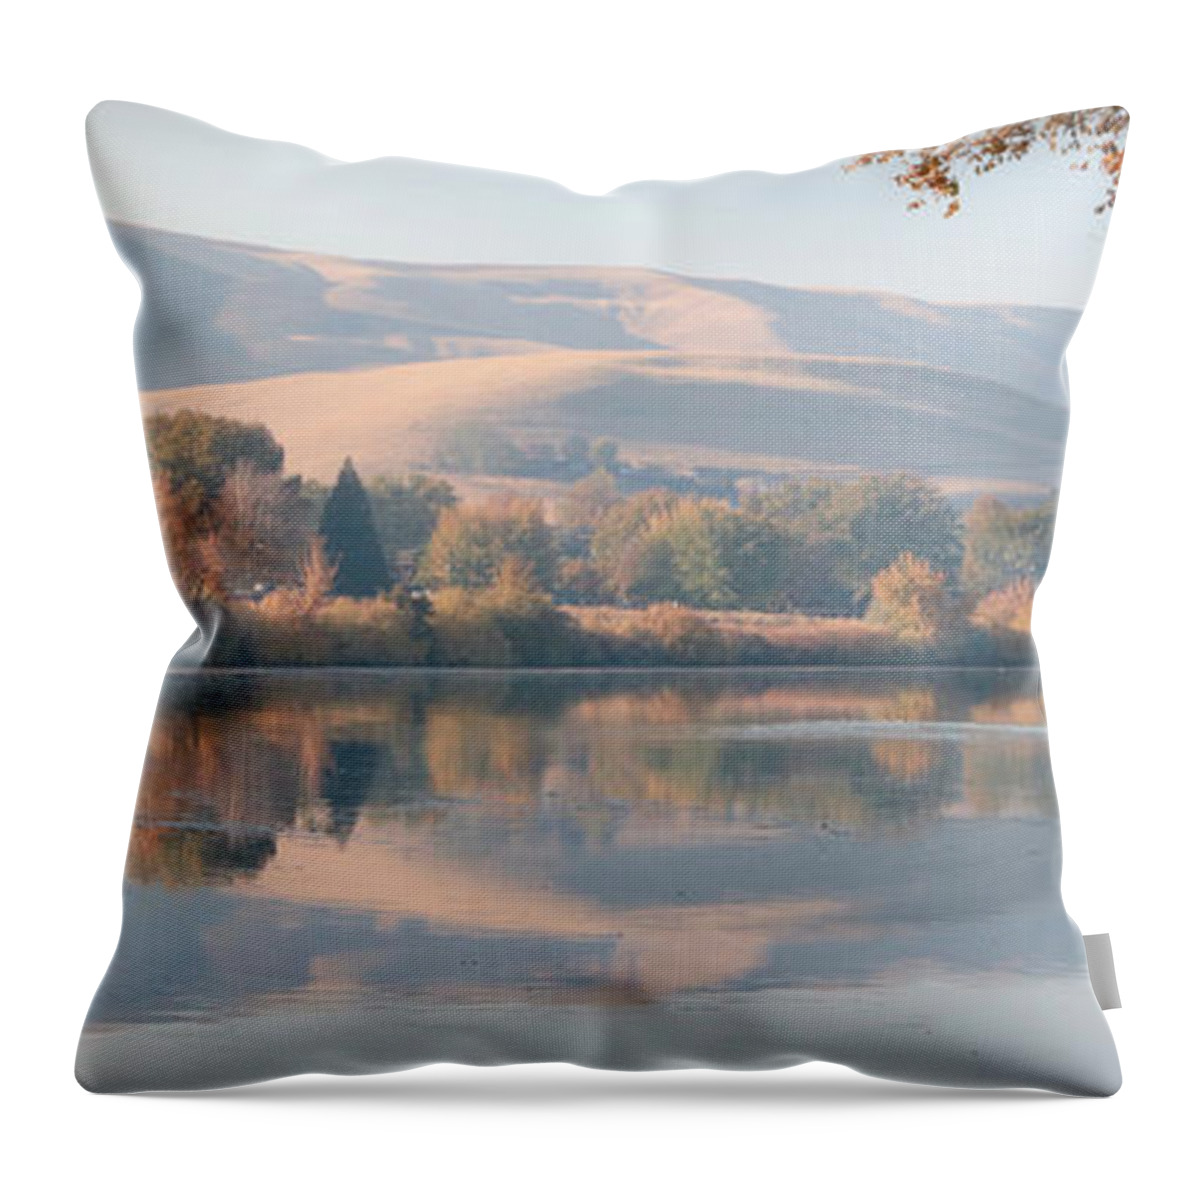 Waterscape Throw Pillow featuring the photograph Peaceful Autumn River Panorama by Carol Groenen